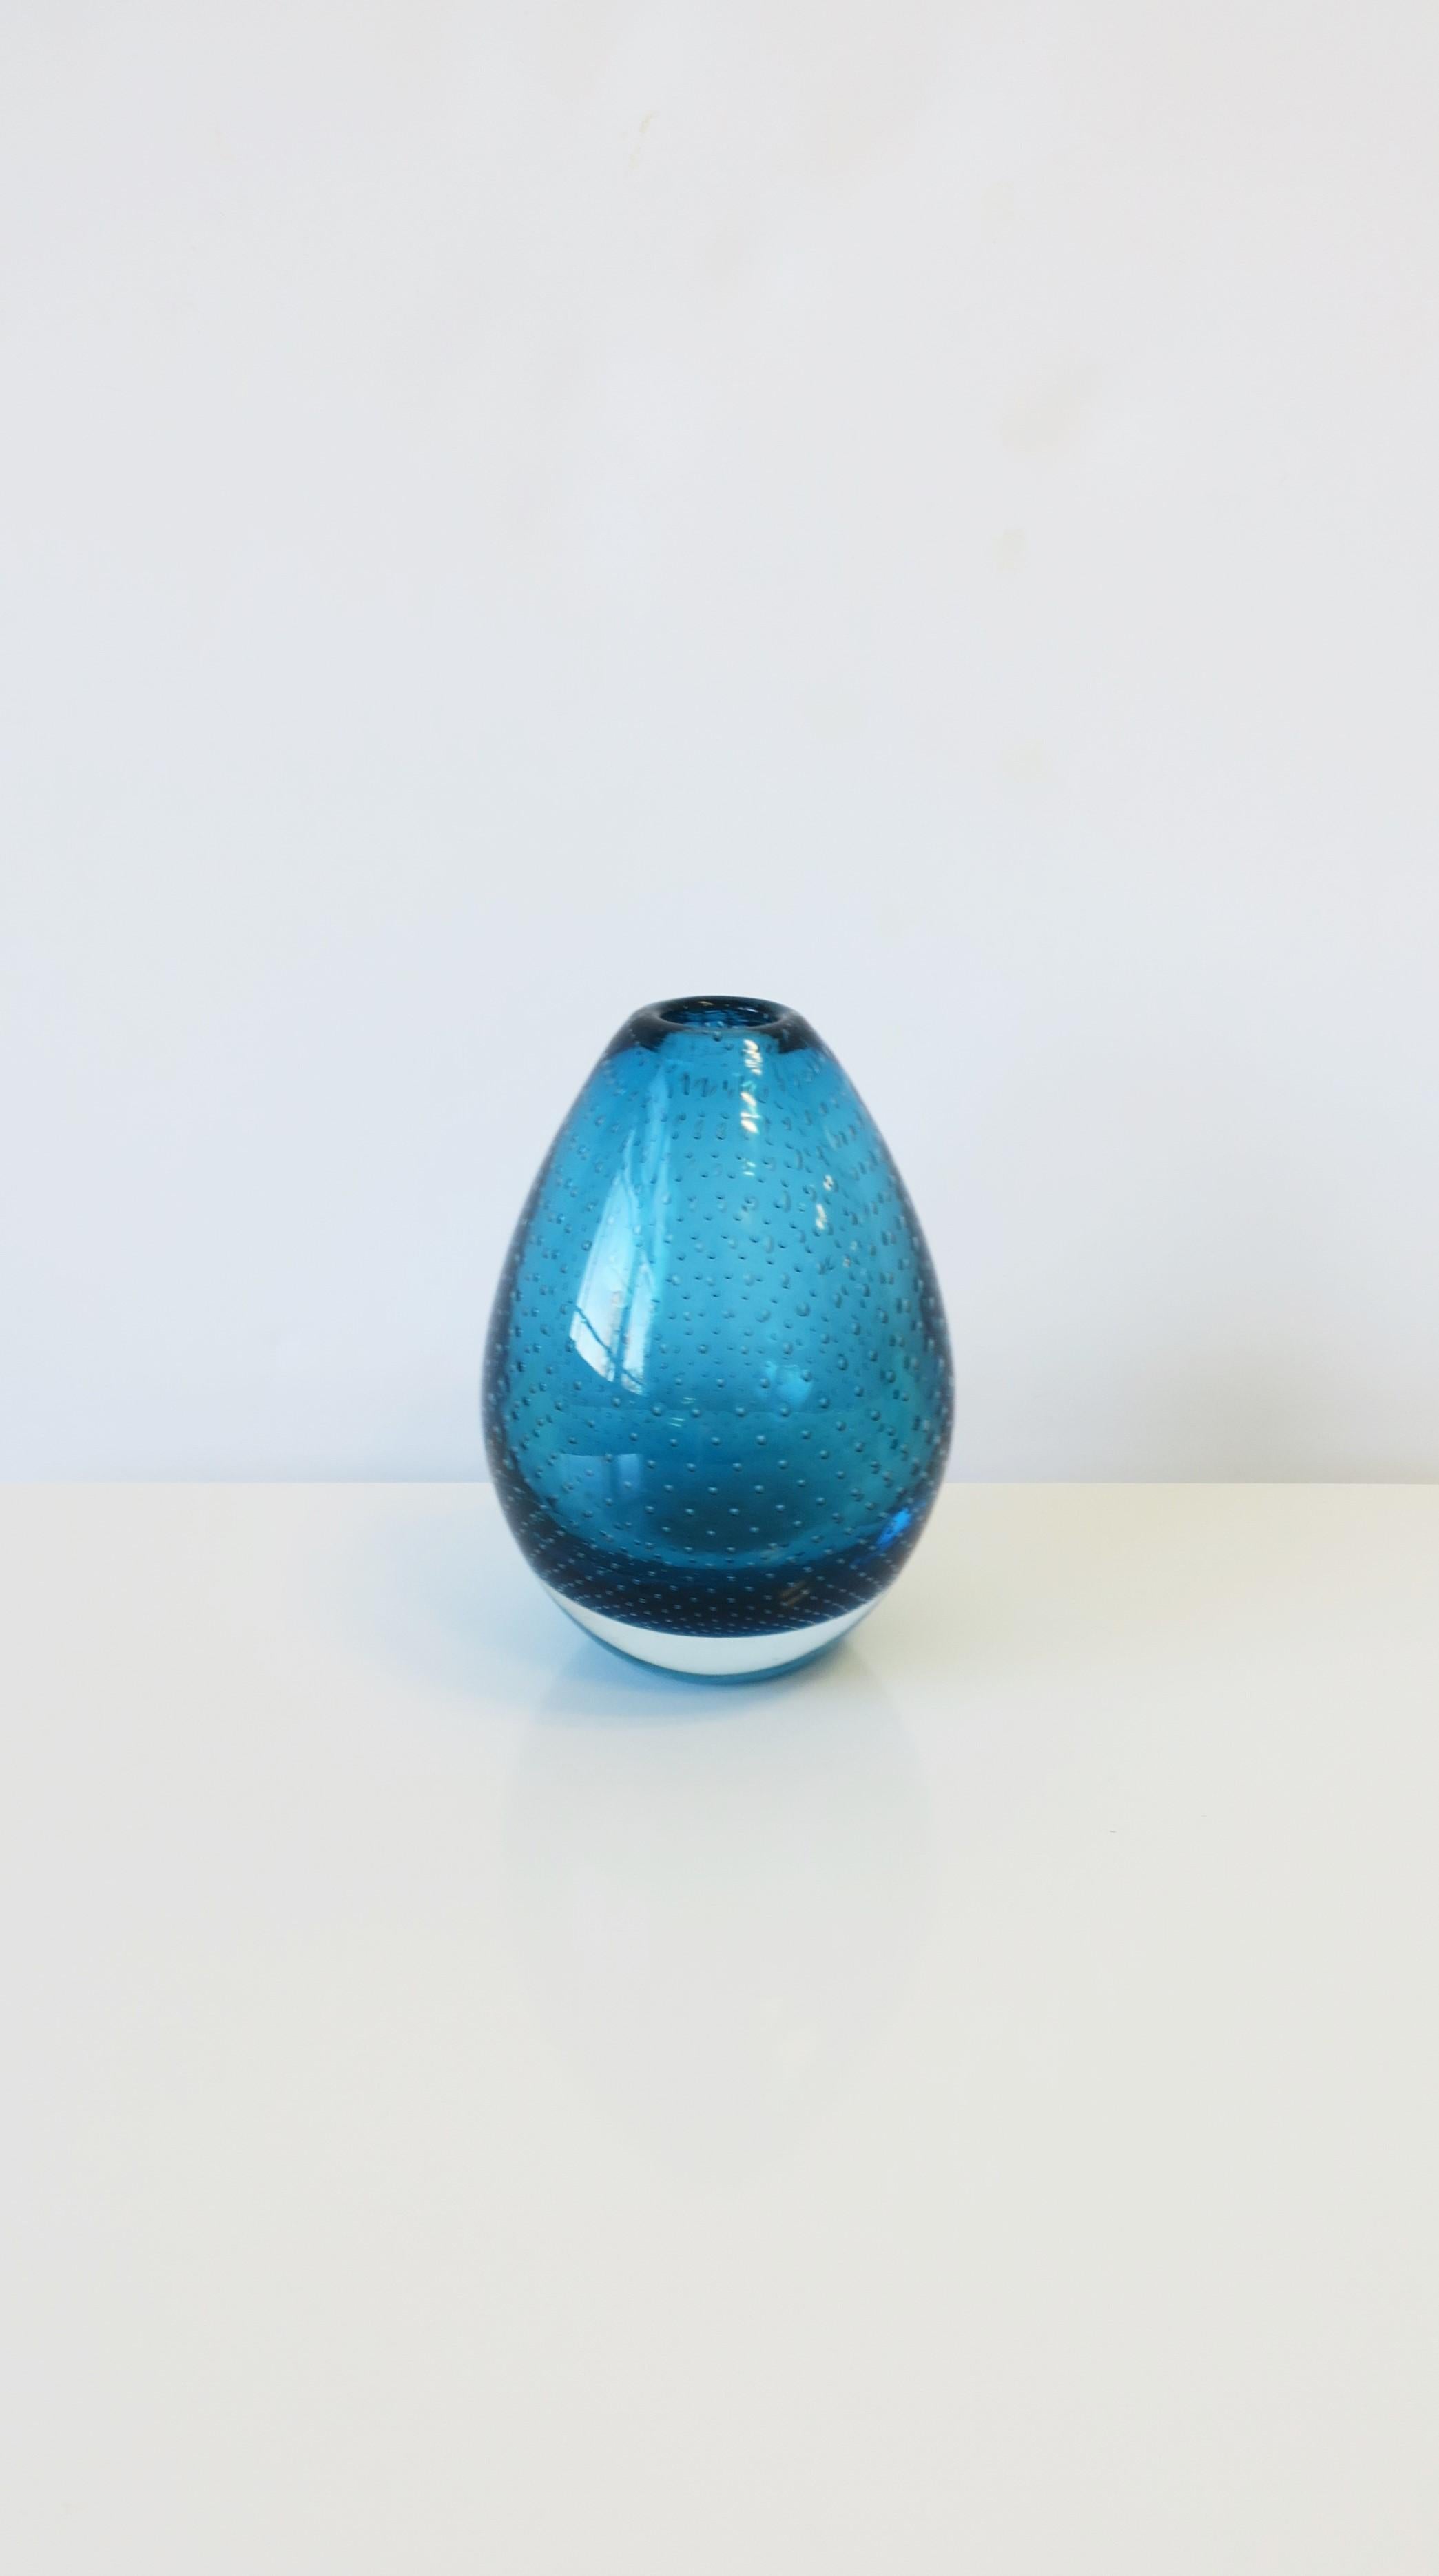 A beautiful and substantial Scandinavia Modern Mid-Century Modern blue art glass vase with a tiny, controlled bubble design, mid-20th century, Denmark, Scandinavia. 

Dimensions: 4.07